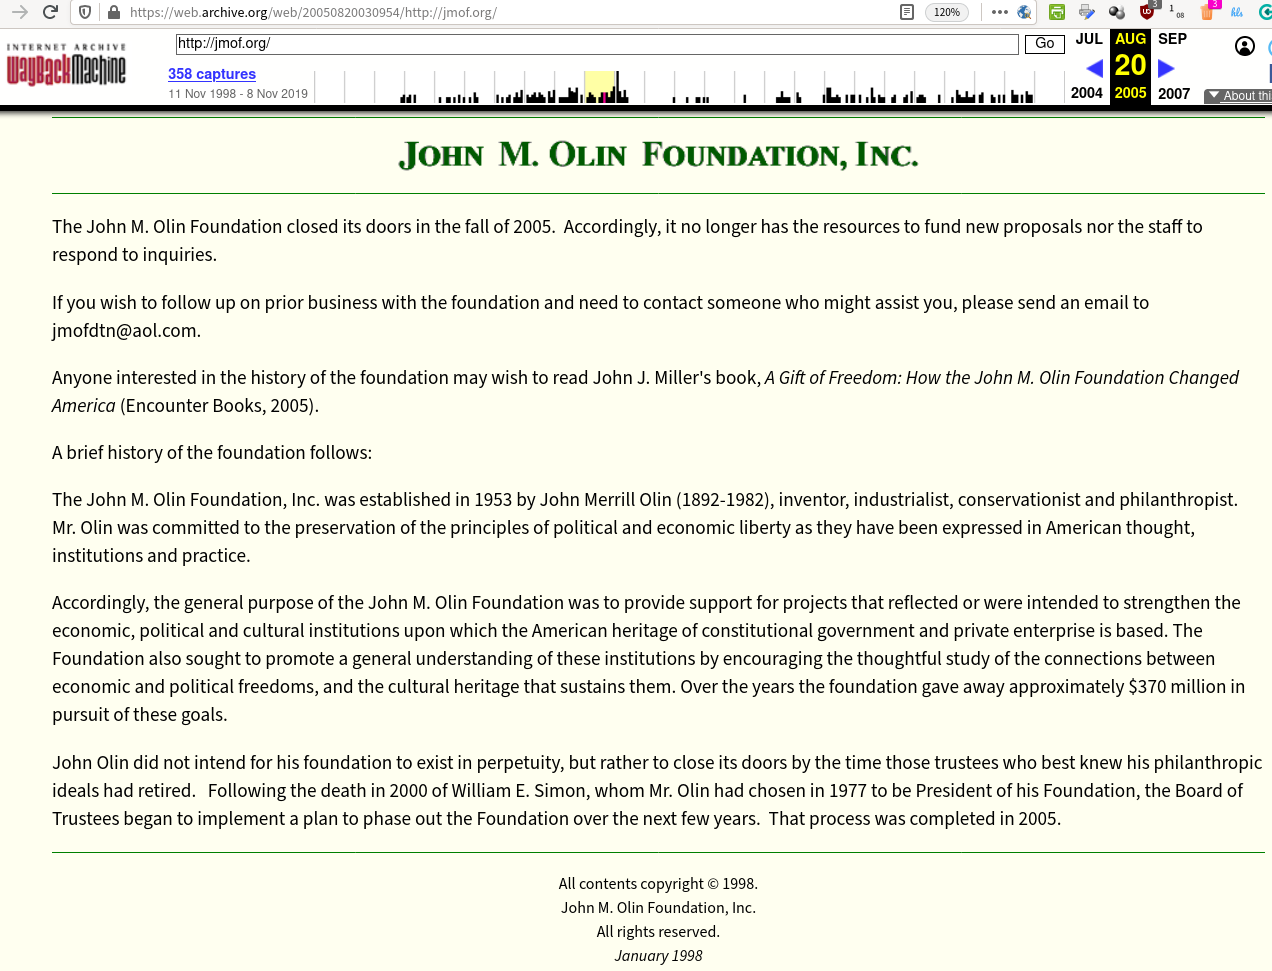 olin_foundation-closure-internet_archive.png